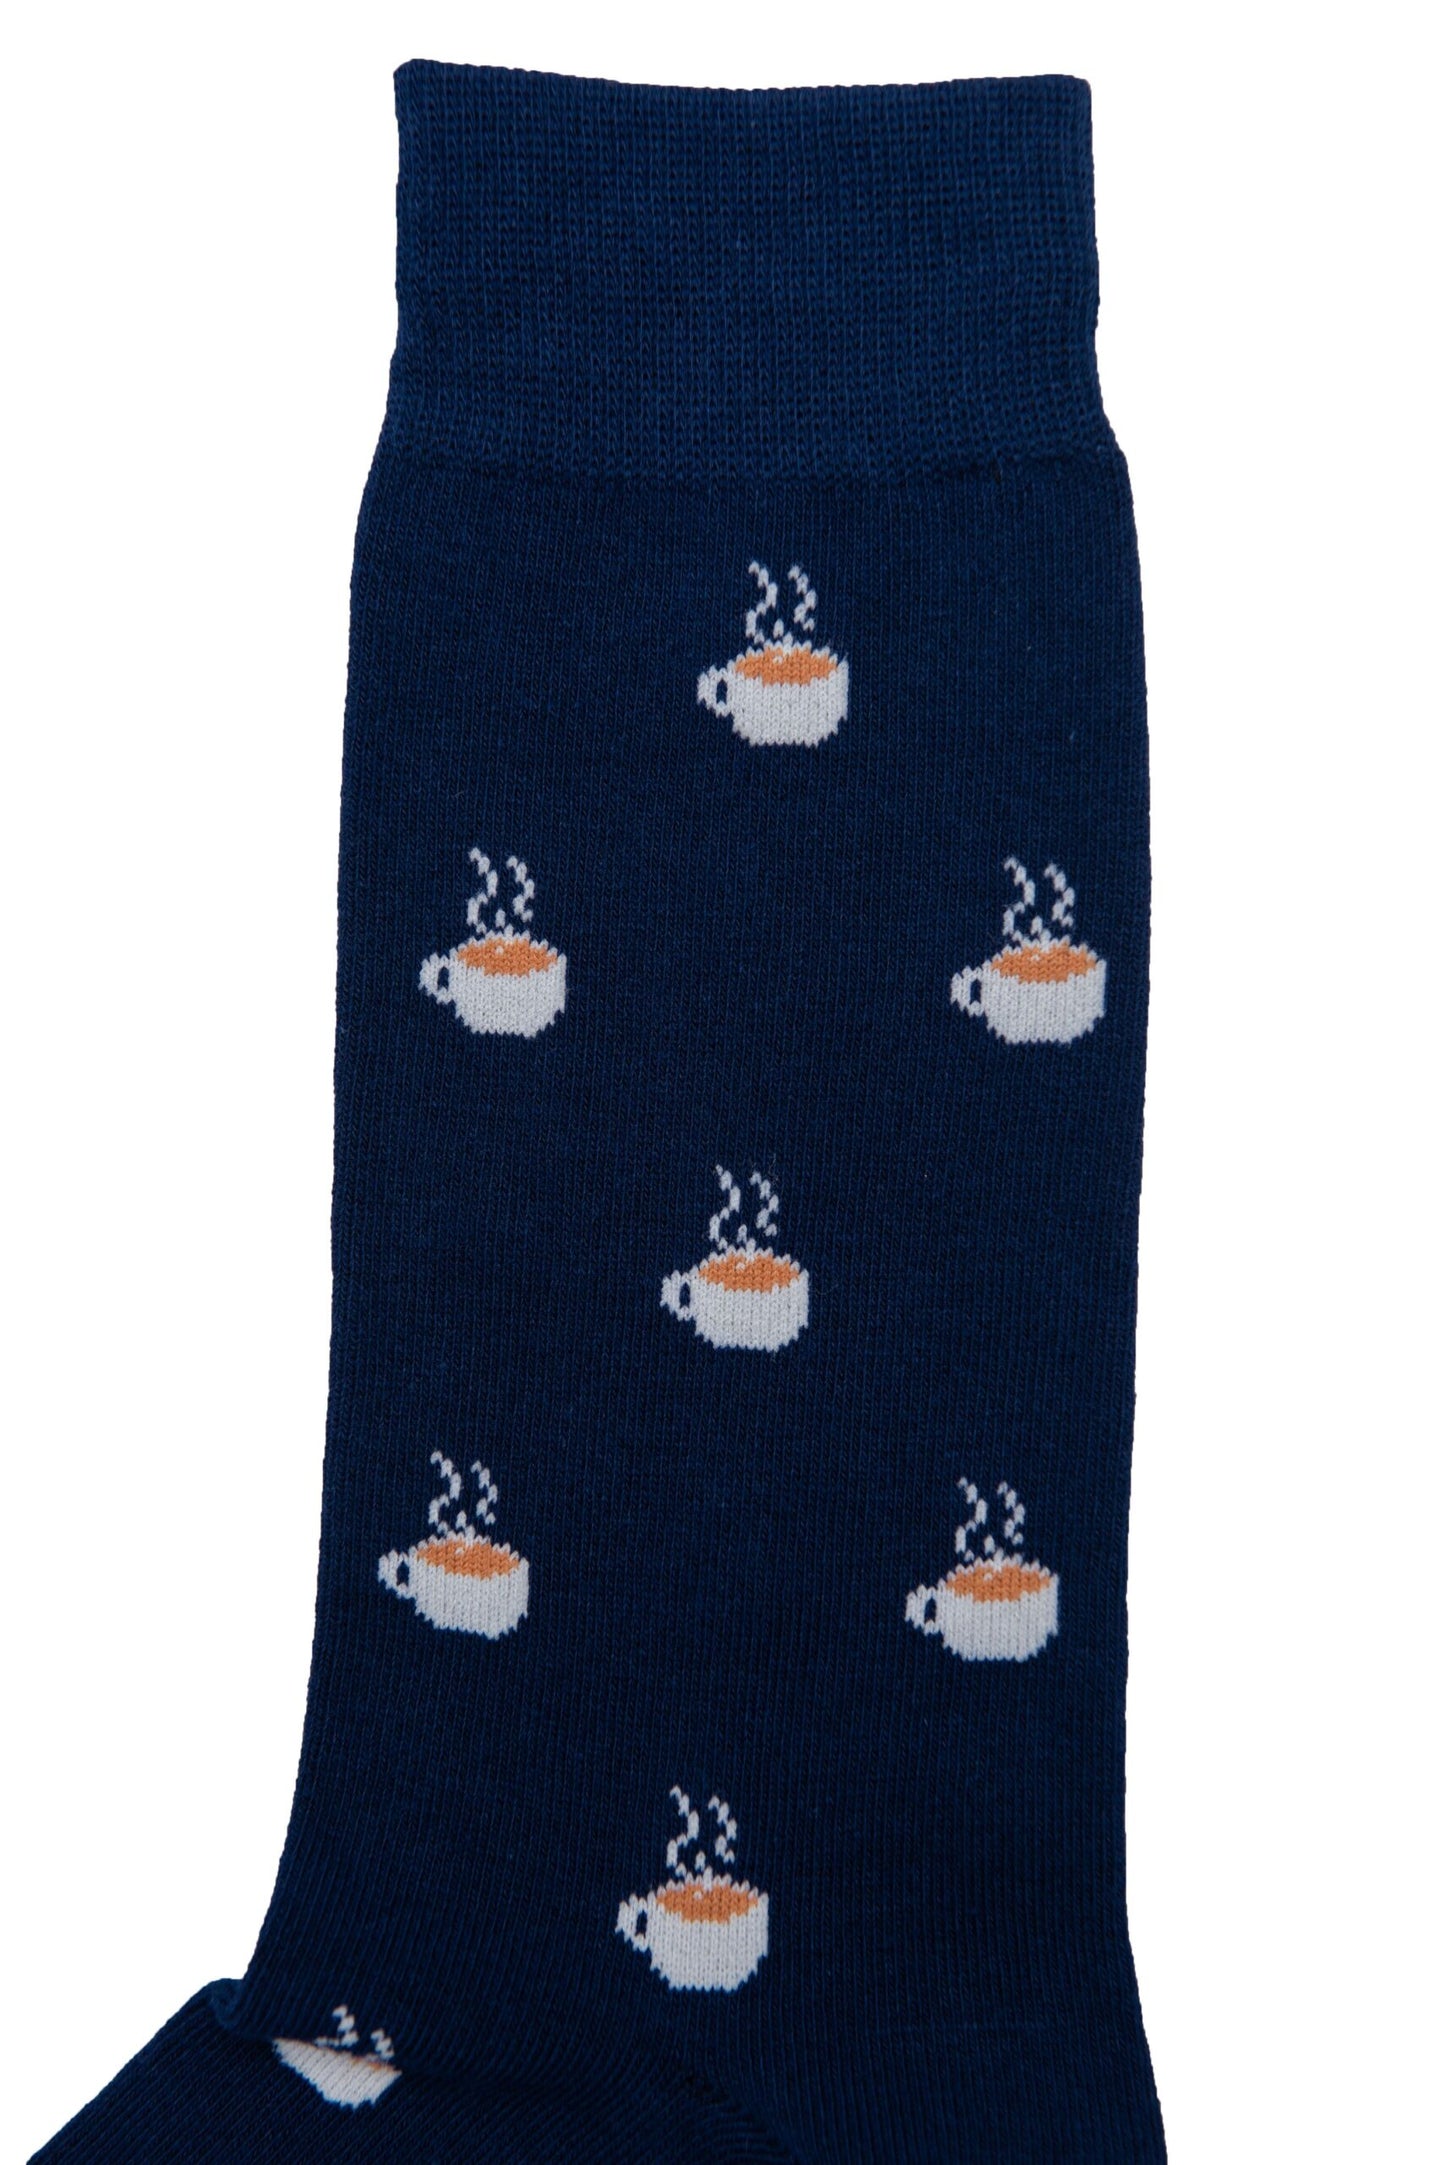 A Coffee Socks with coffee cup pattern.